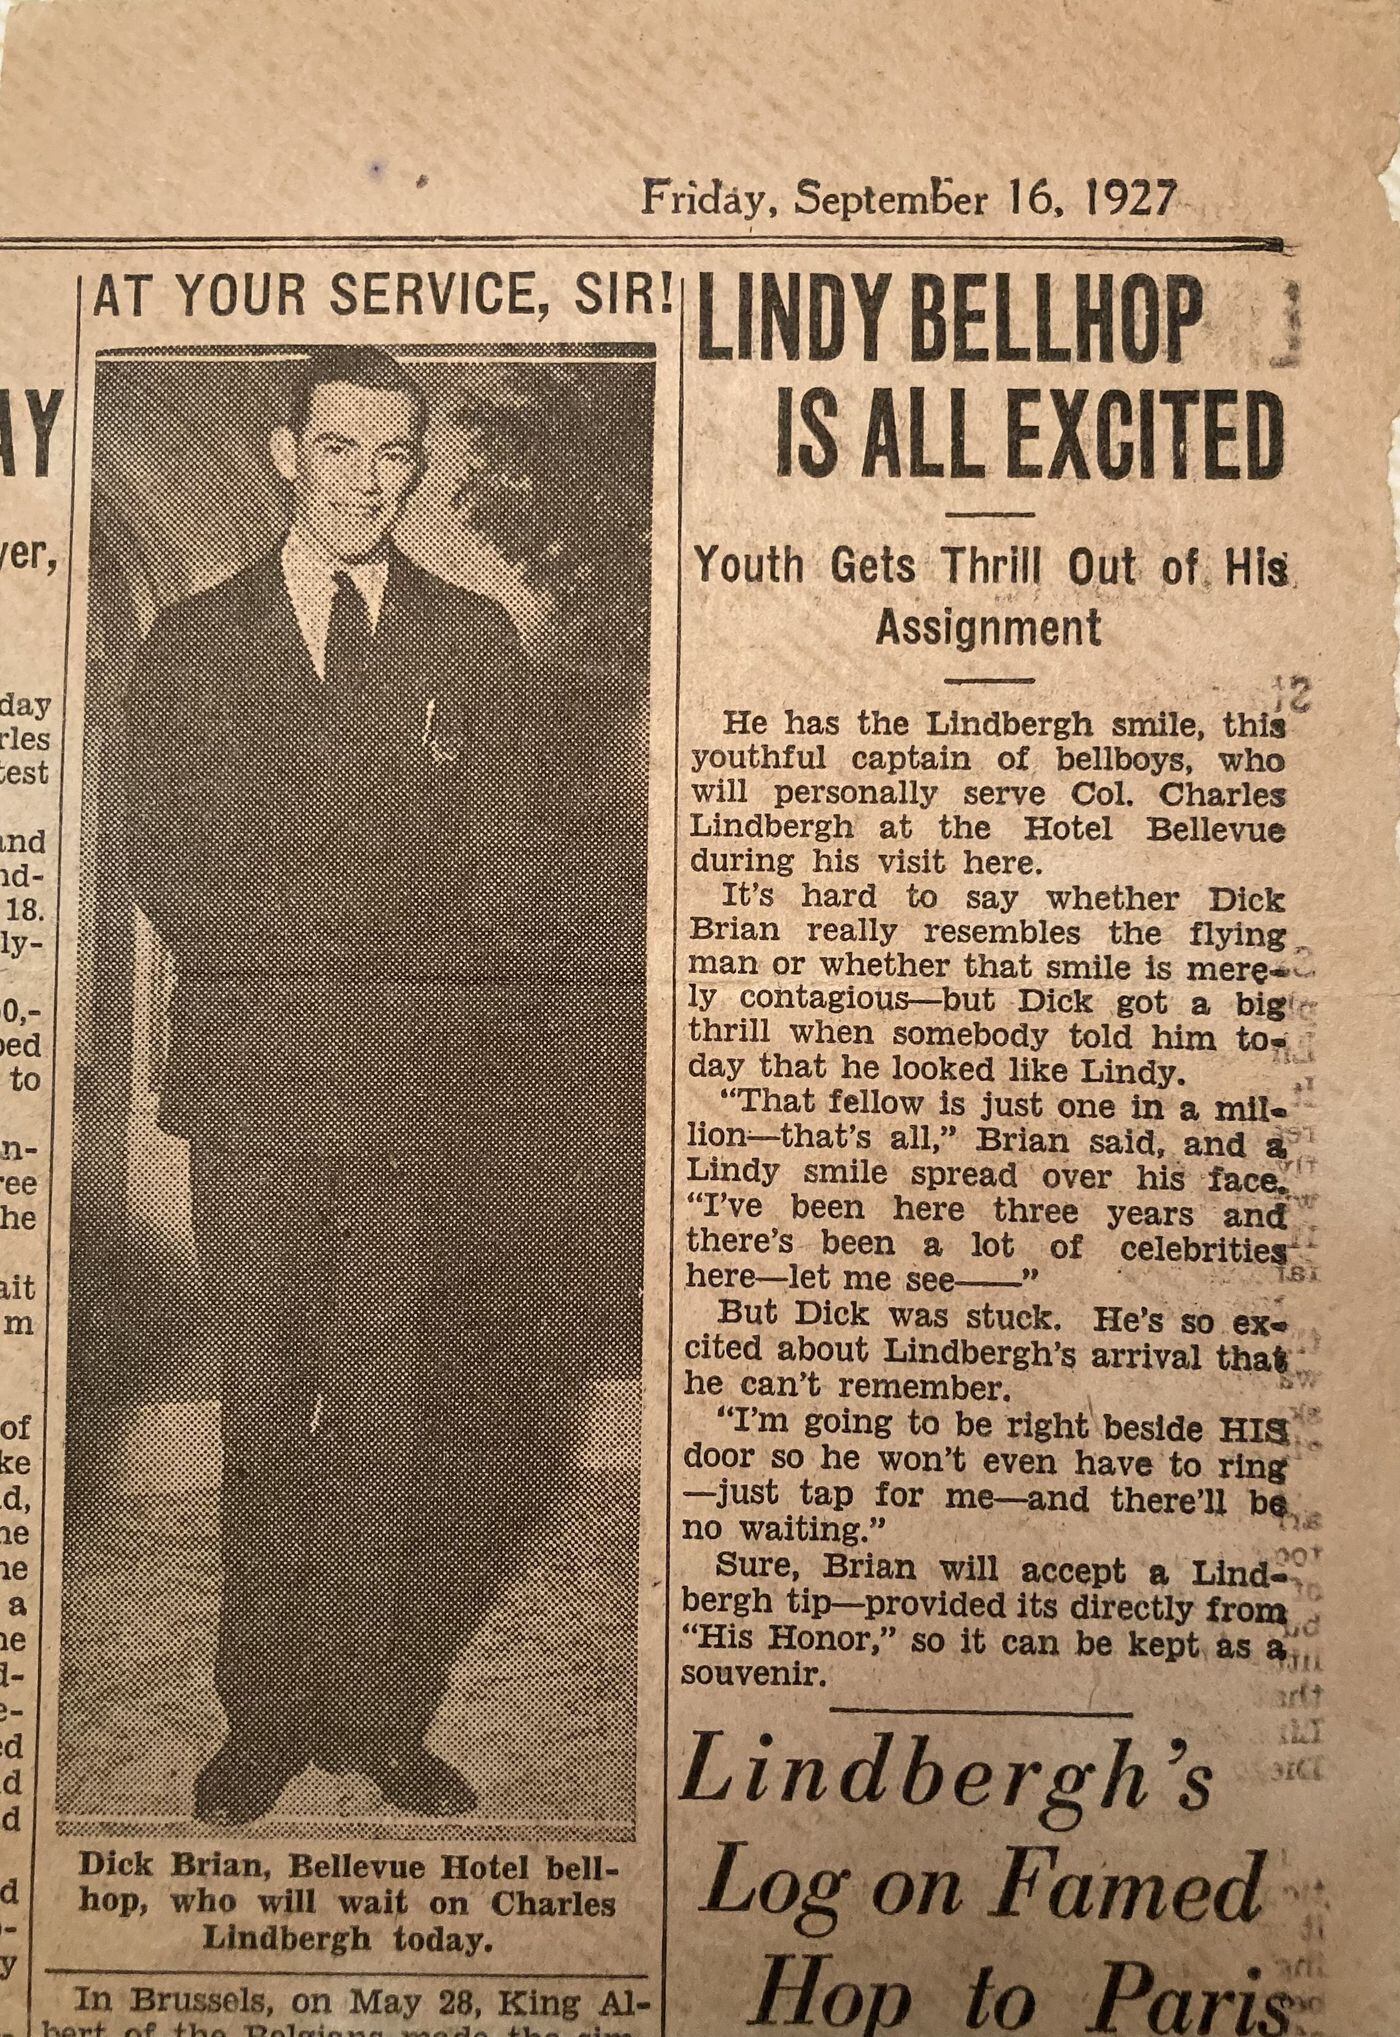 The "youthful captain of the bellboys" is written up in the San Francisco press. Richard Brian was chosen to personally serve Charles Lindbergh when the aviator stayed overnight during the celebratory national tour that followed his 1927 transatlantic flight.